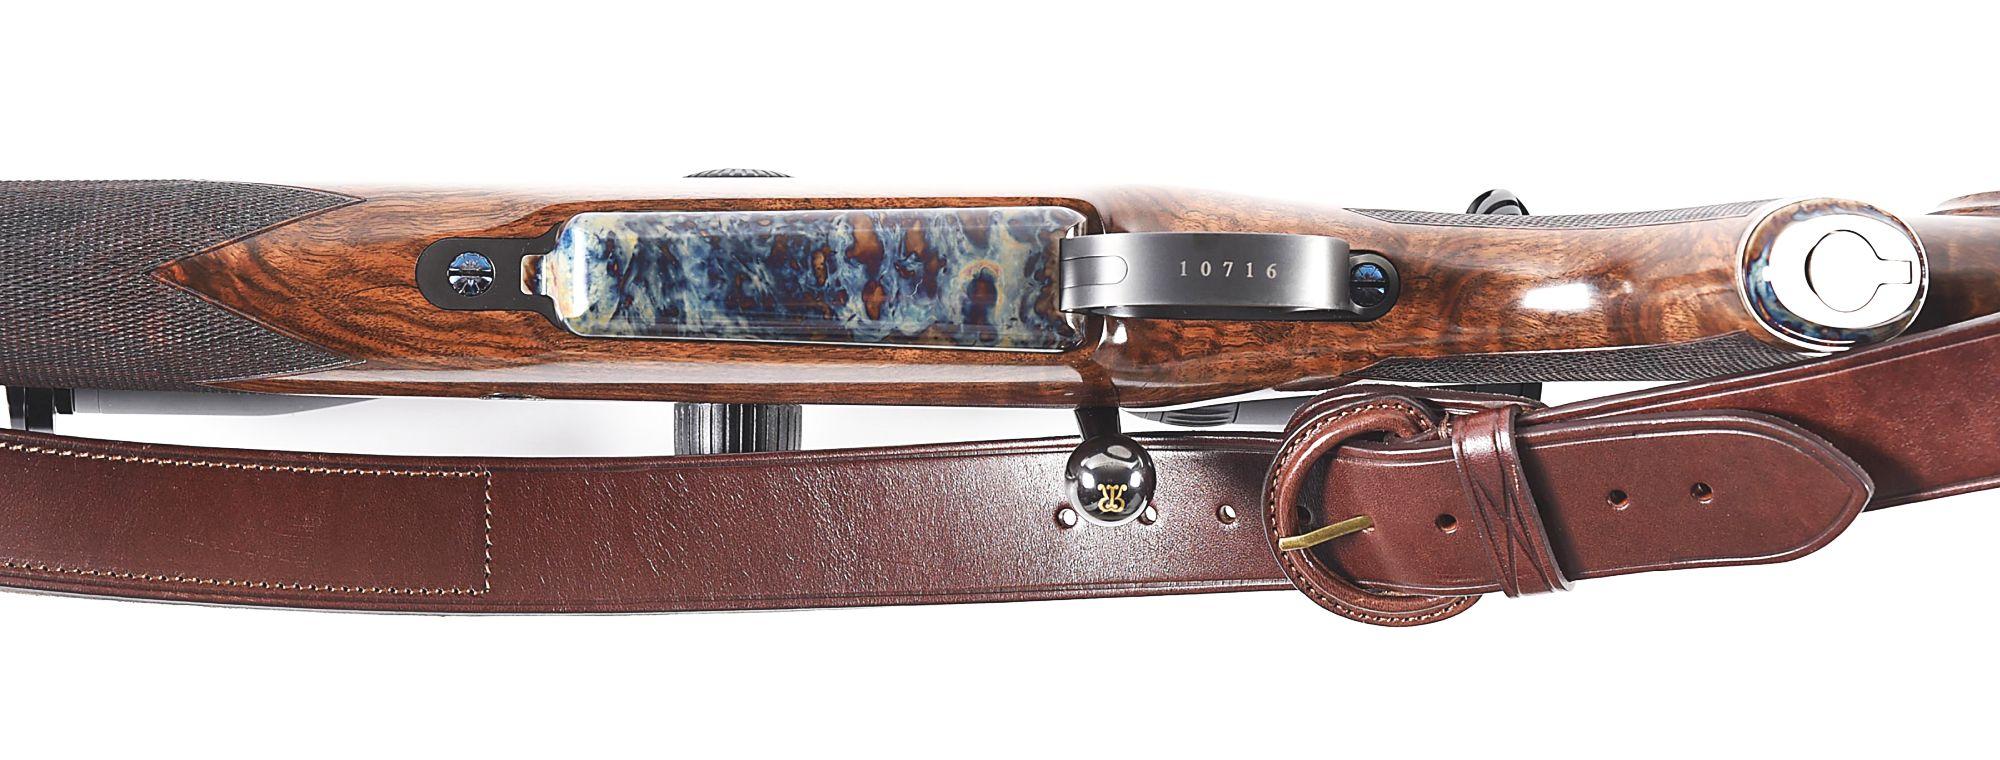 (M) JOHN RIGBY AND MAUSER COLLABORATION "BIG GAME" RIFLE IN .375 H&H MAGNUM WITH SWAROVSKI GLASS, CA